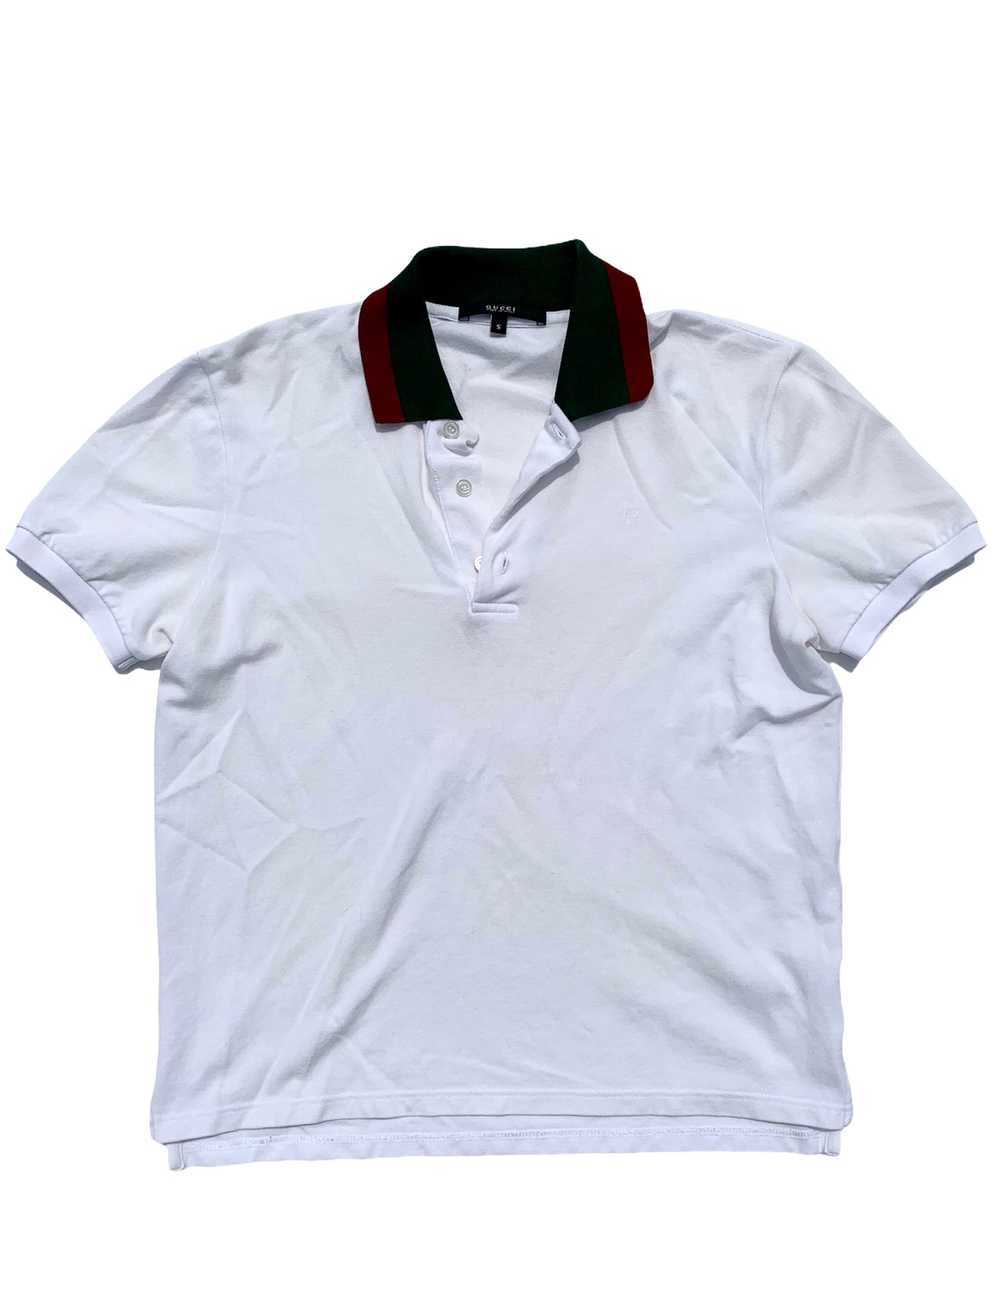 Gucci White Polo Shirt With Web Green/Red Collar - image 2